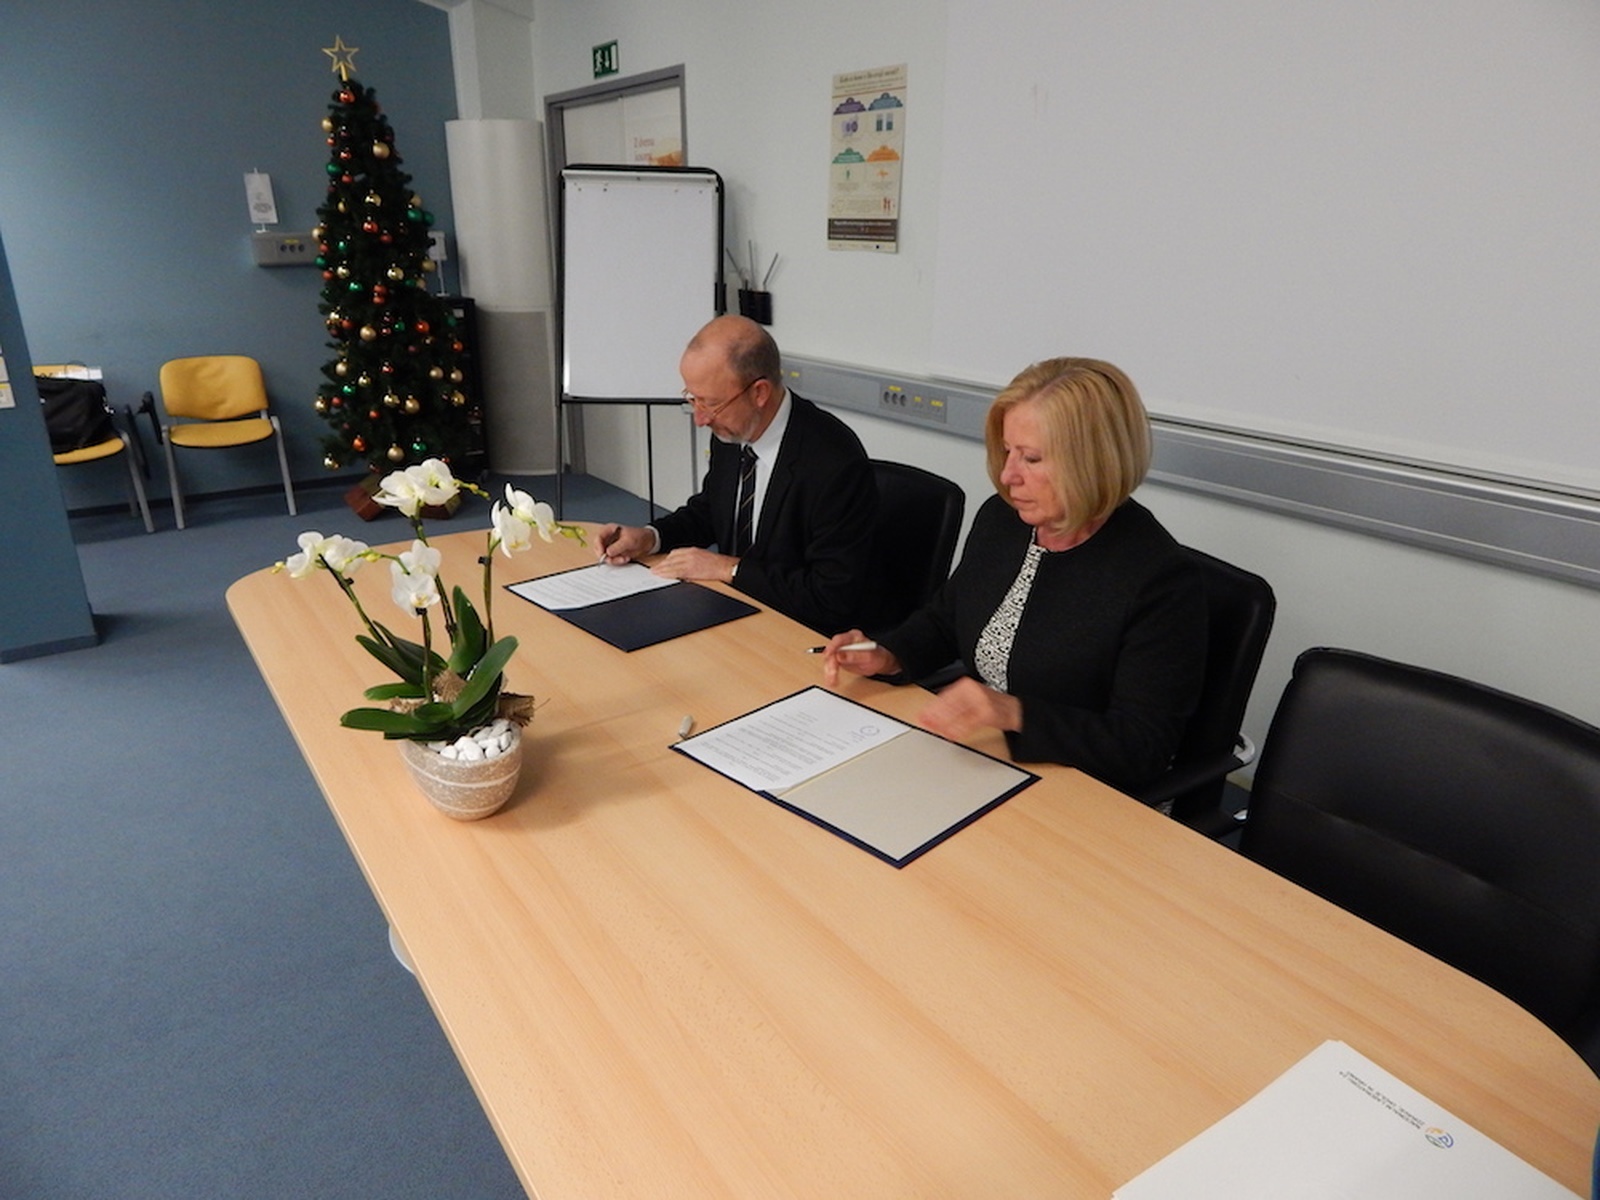 The University of Nova Gorica and the National Laboratory for Health, Environment and Food signed a Cooperation Agreement